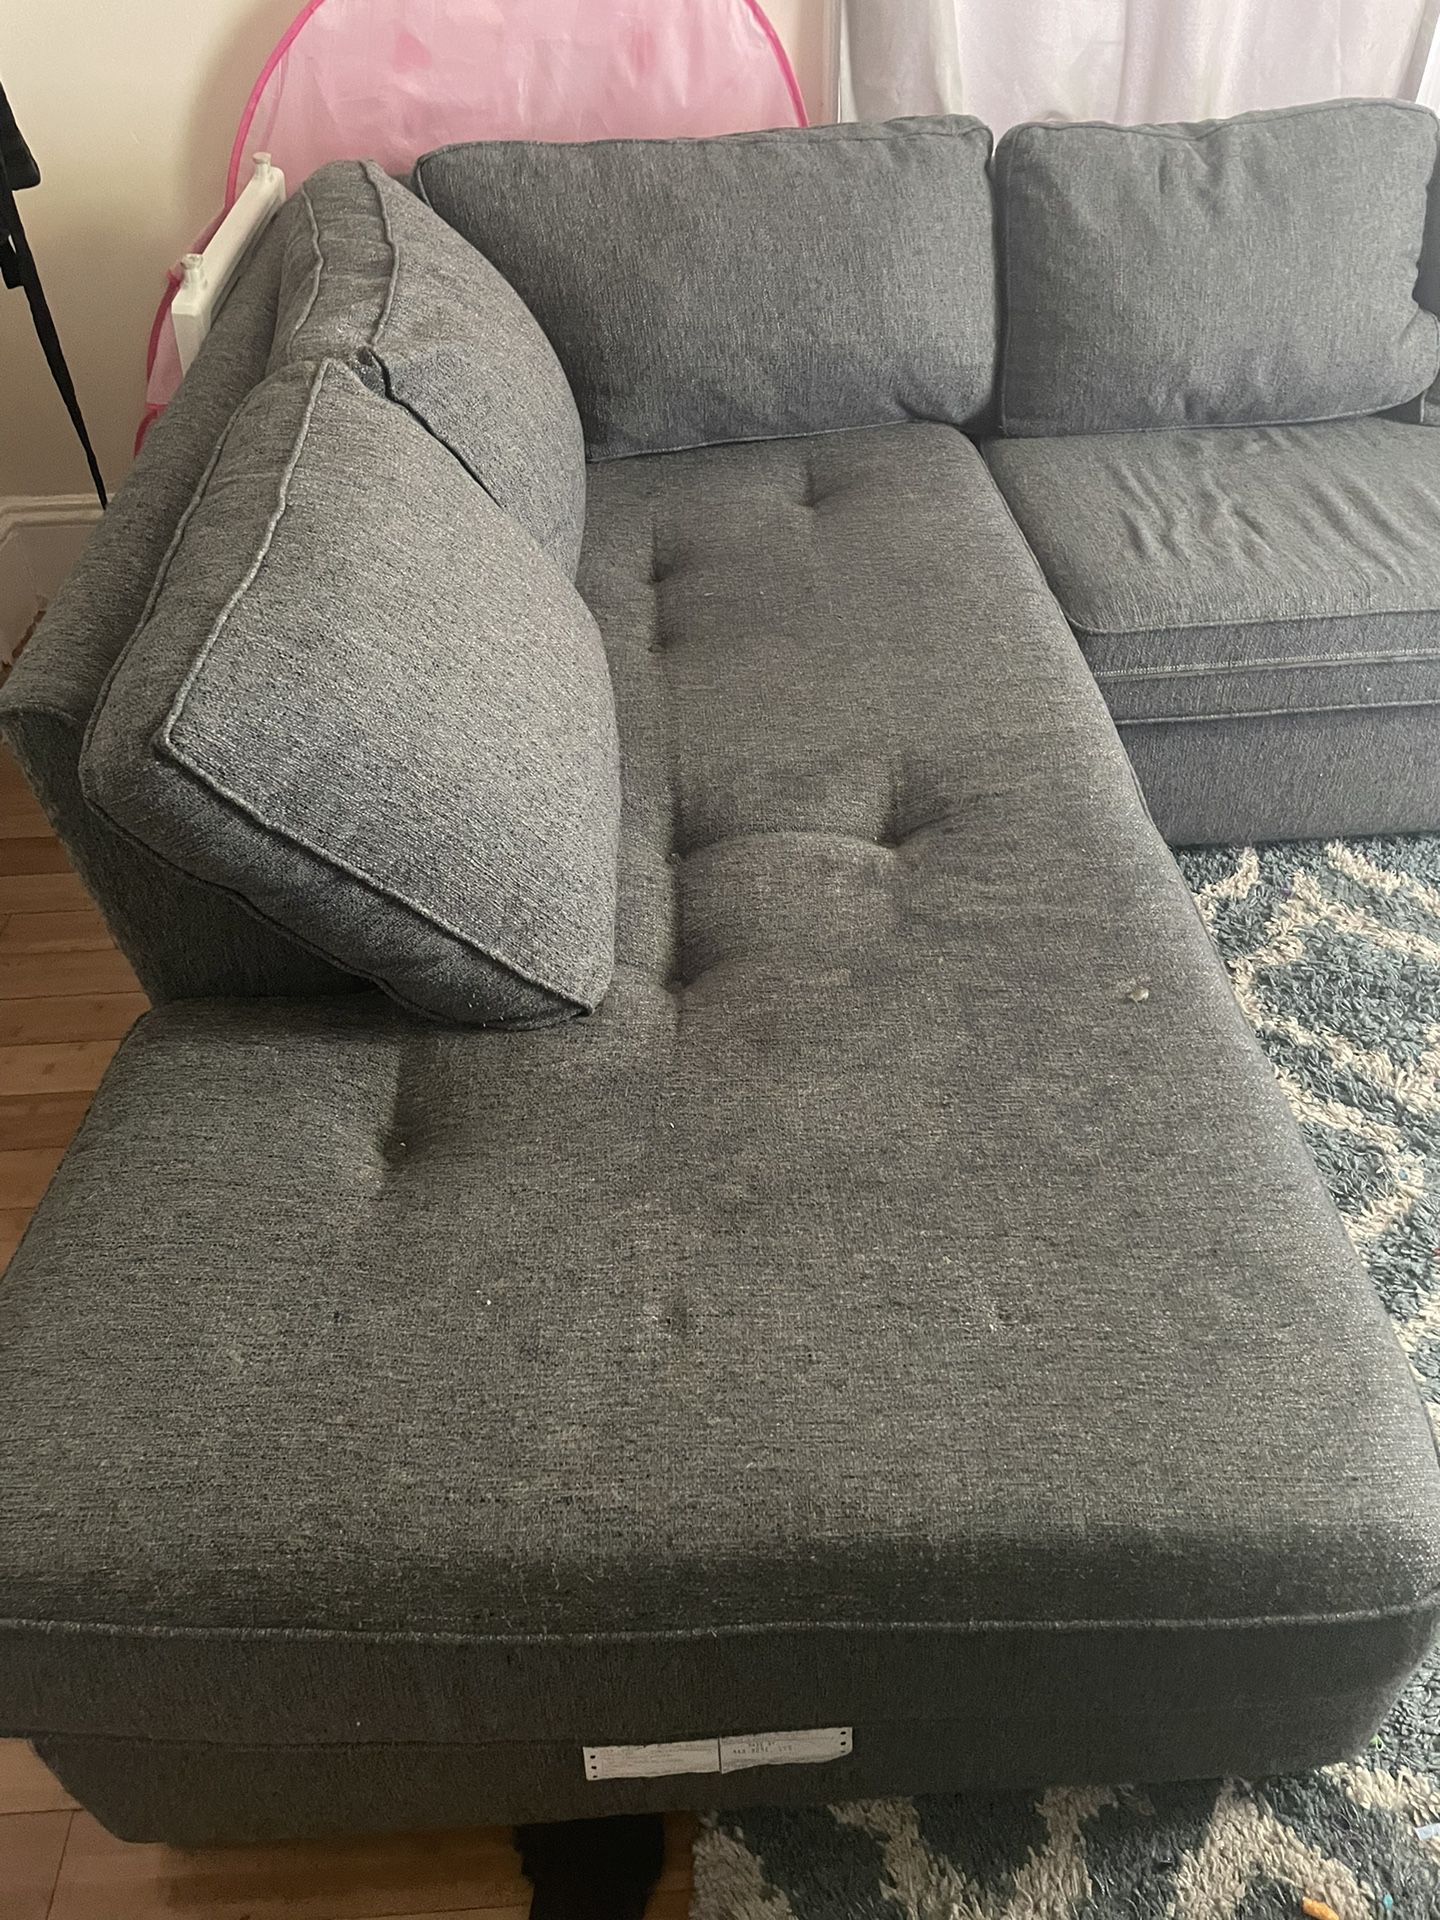 Large Sectional Couch 